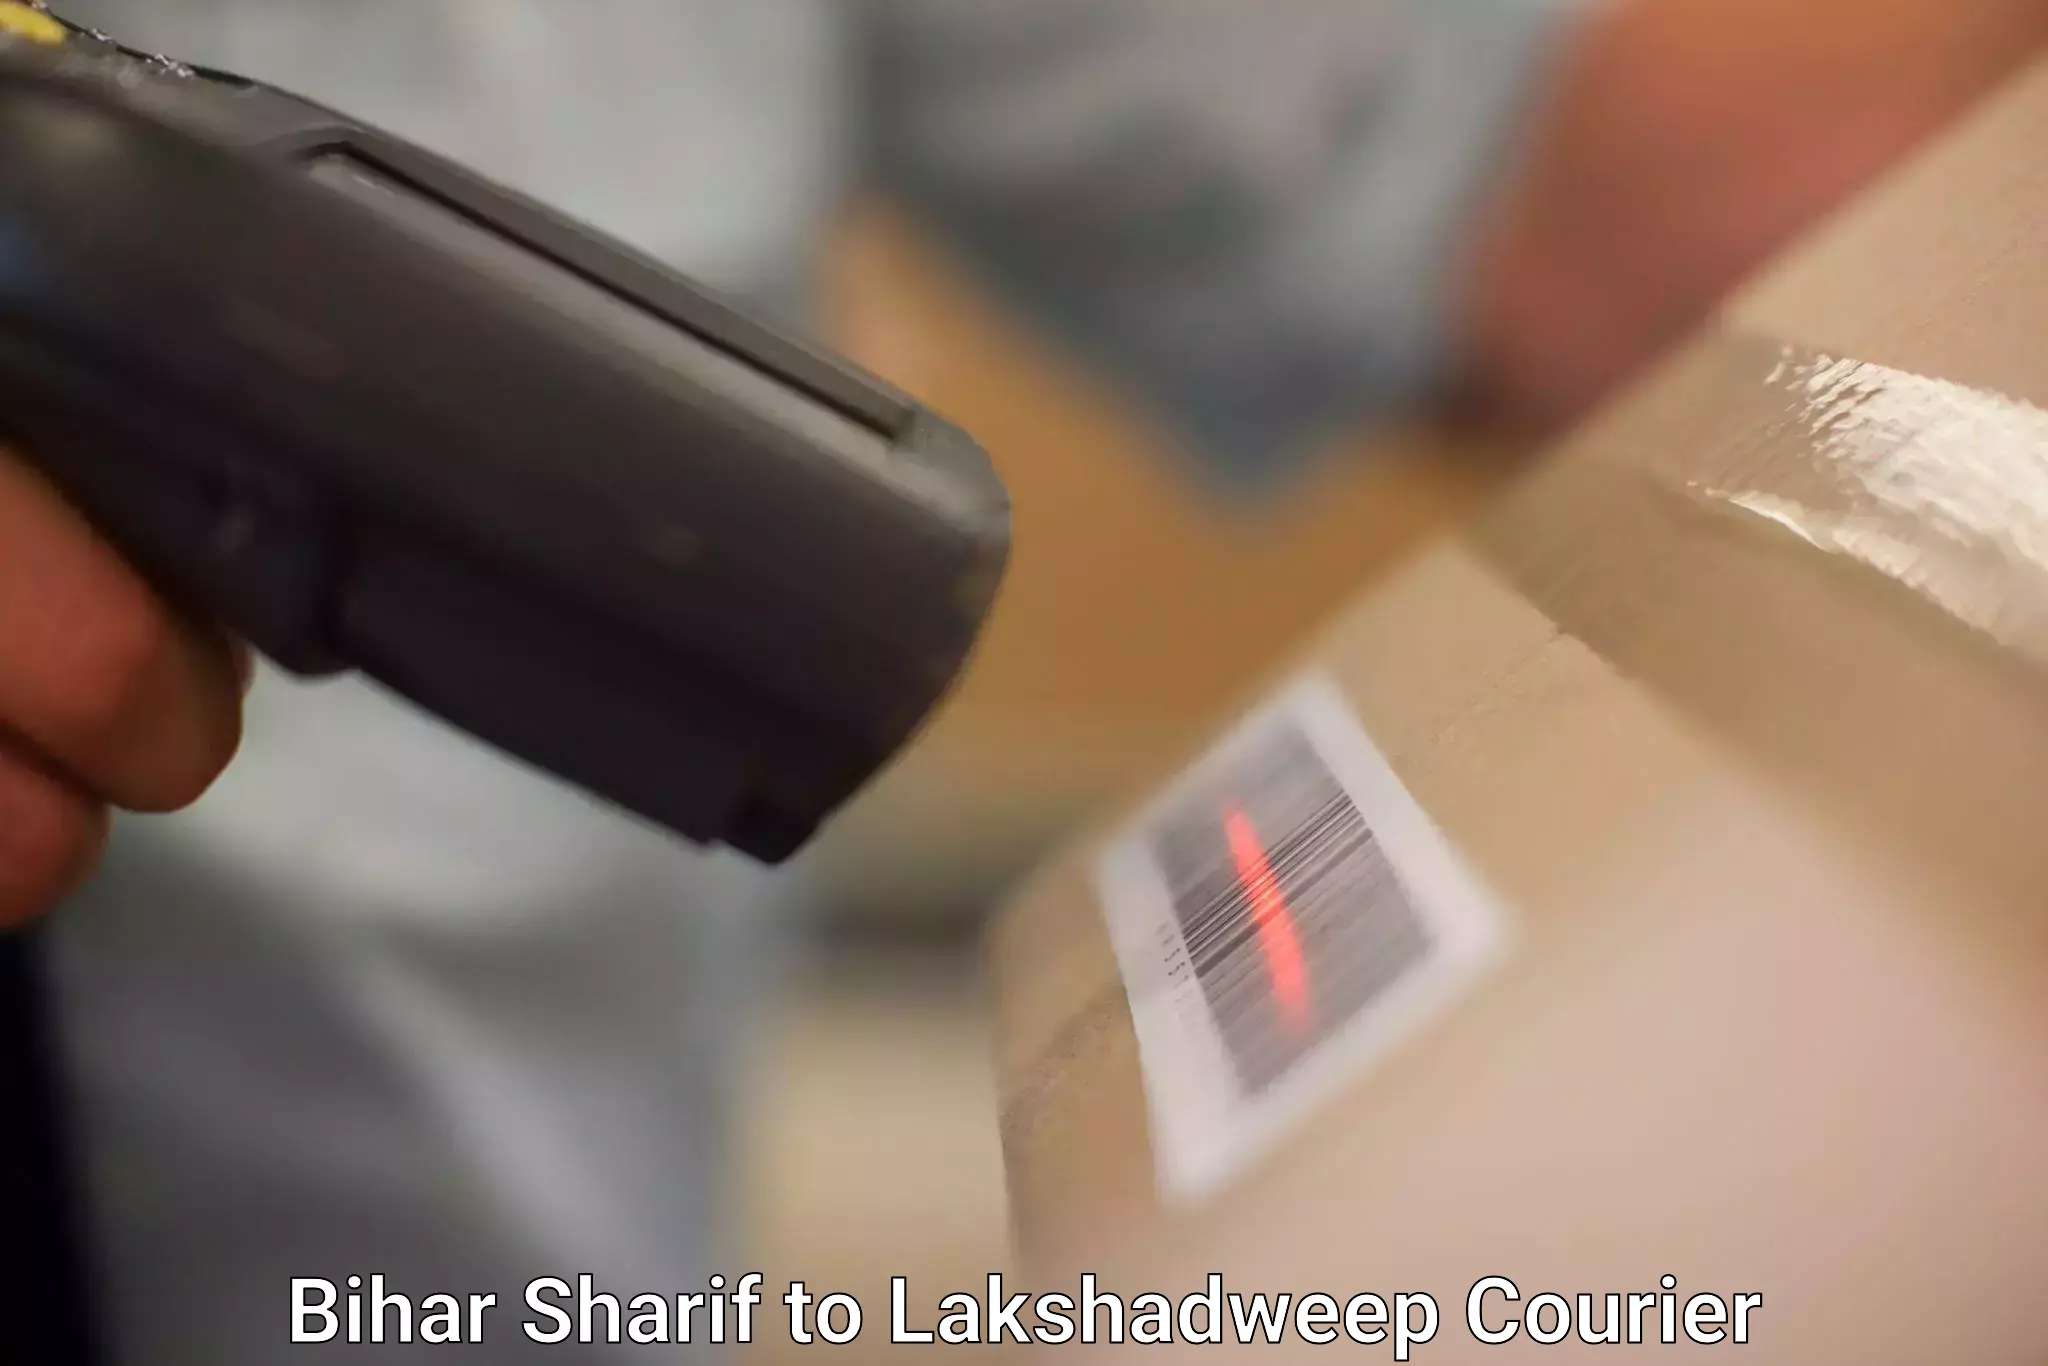 Multi-national courier services Bihar Sharif to Lakshadweep